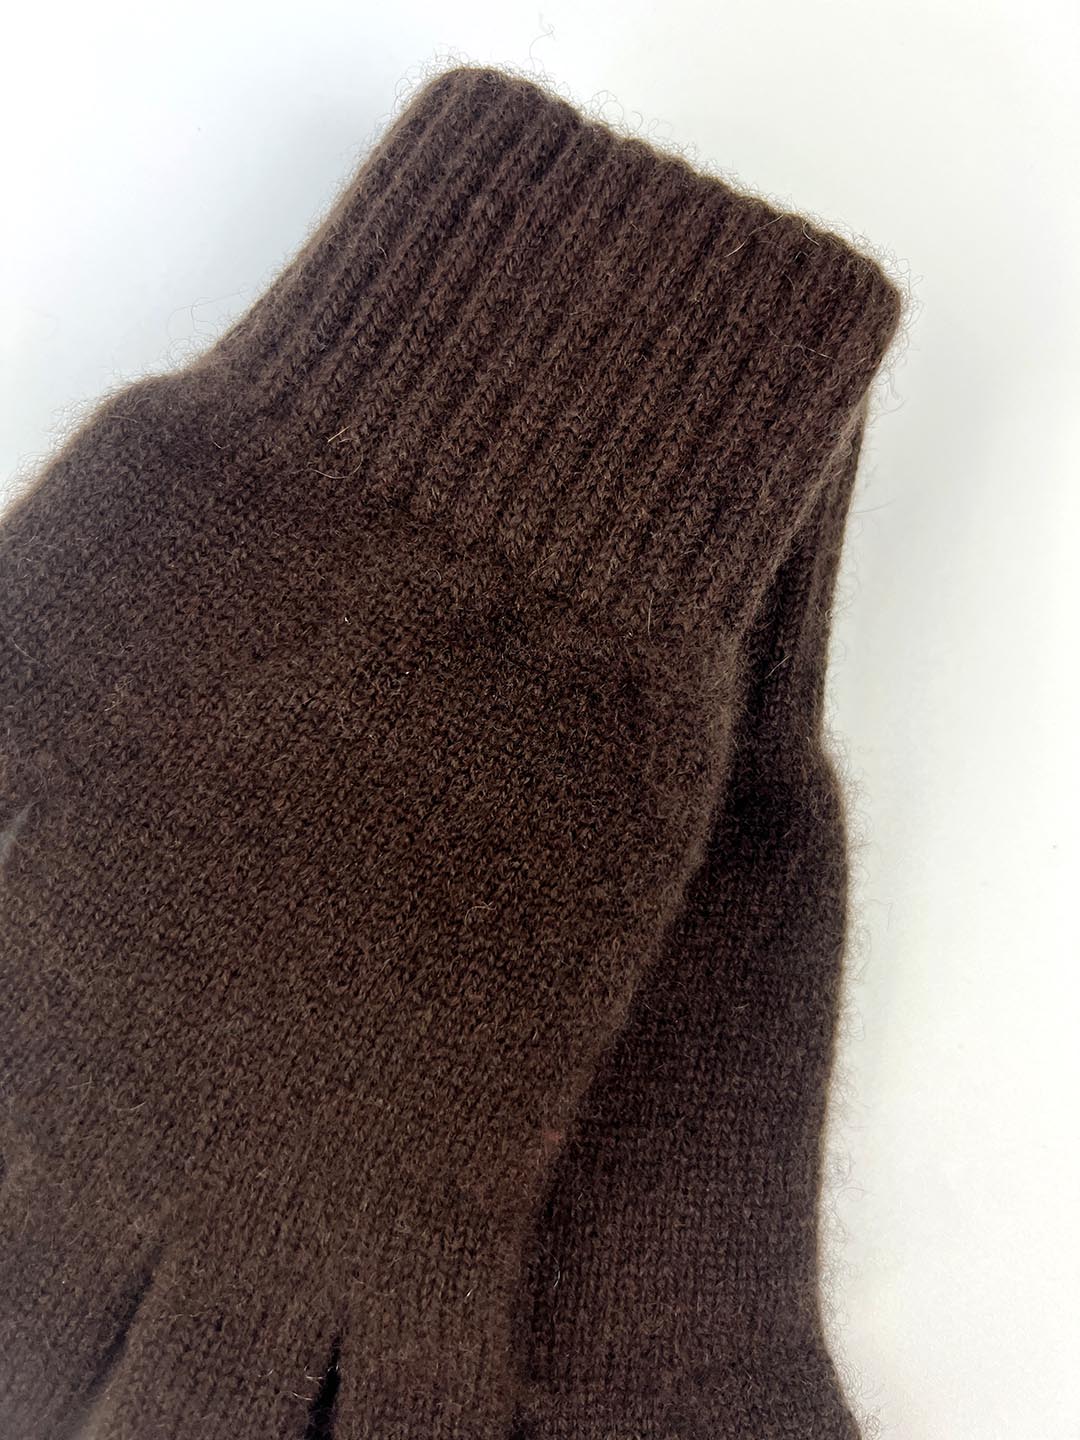 cashmere gloves in shade of brown